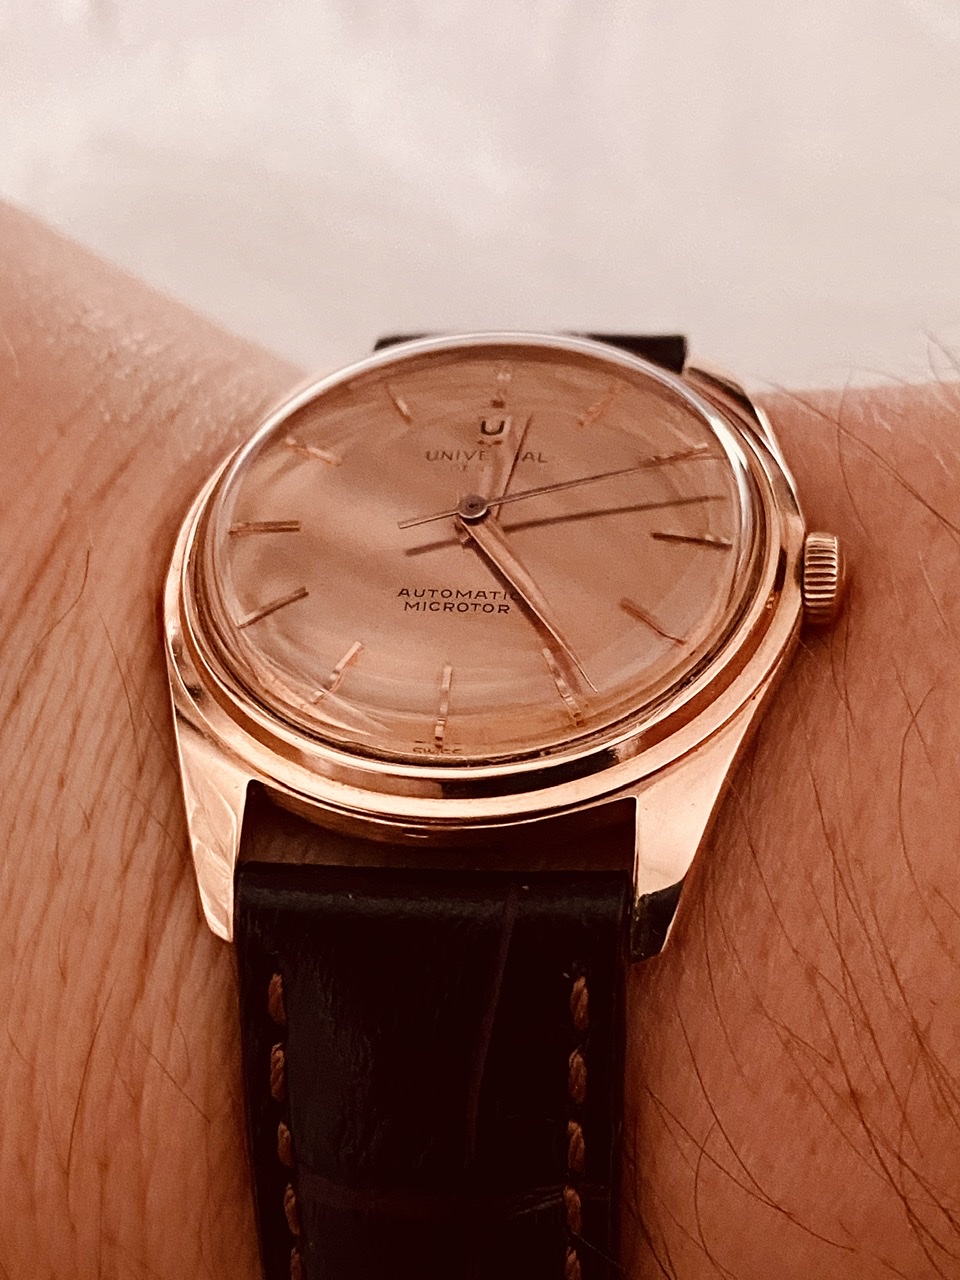 Owner Review: Universal Geneve Microtor Automatic